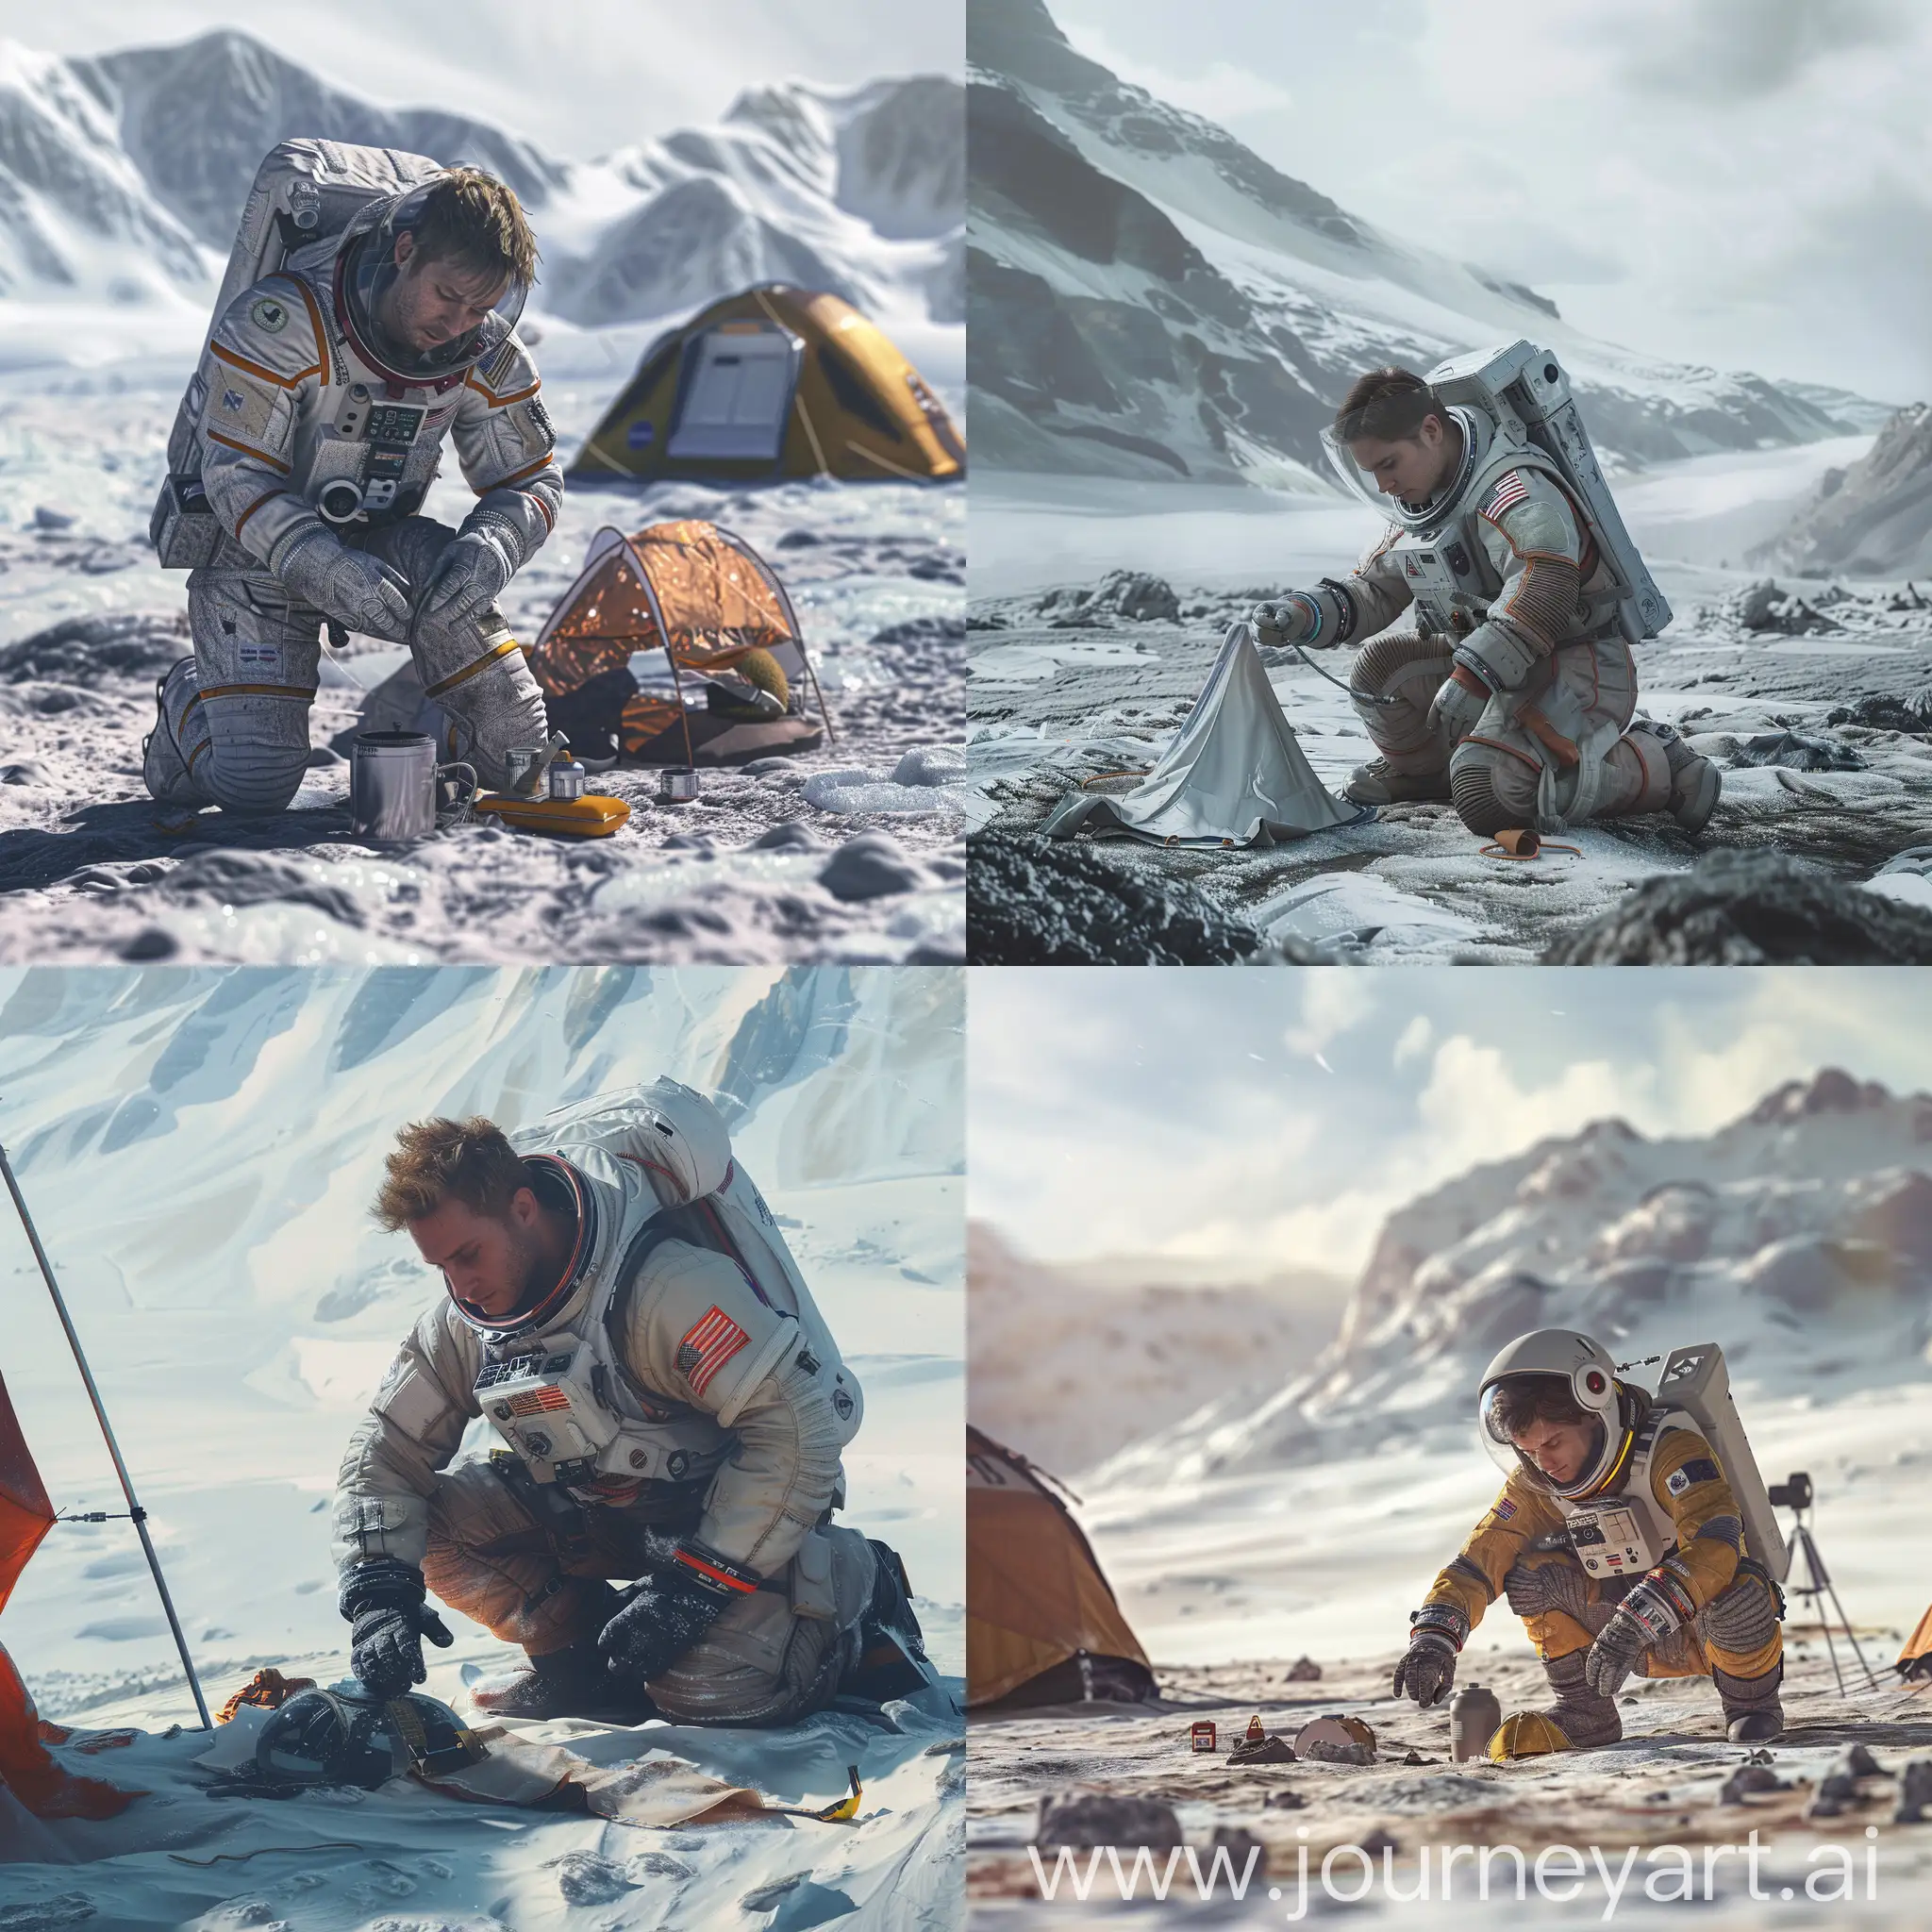 Young-Astronaut-Establishing-Camp-on-a-Desolate-Icy-Planet